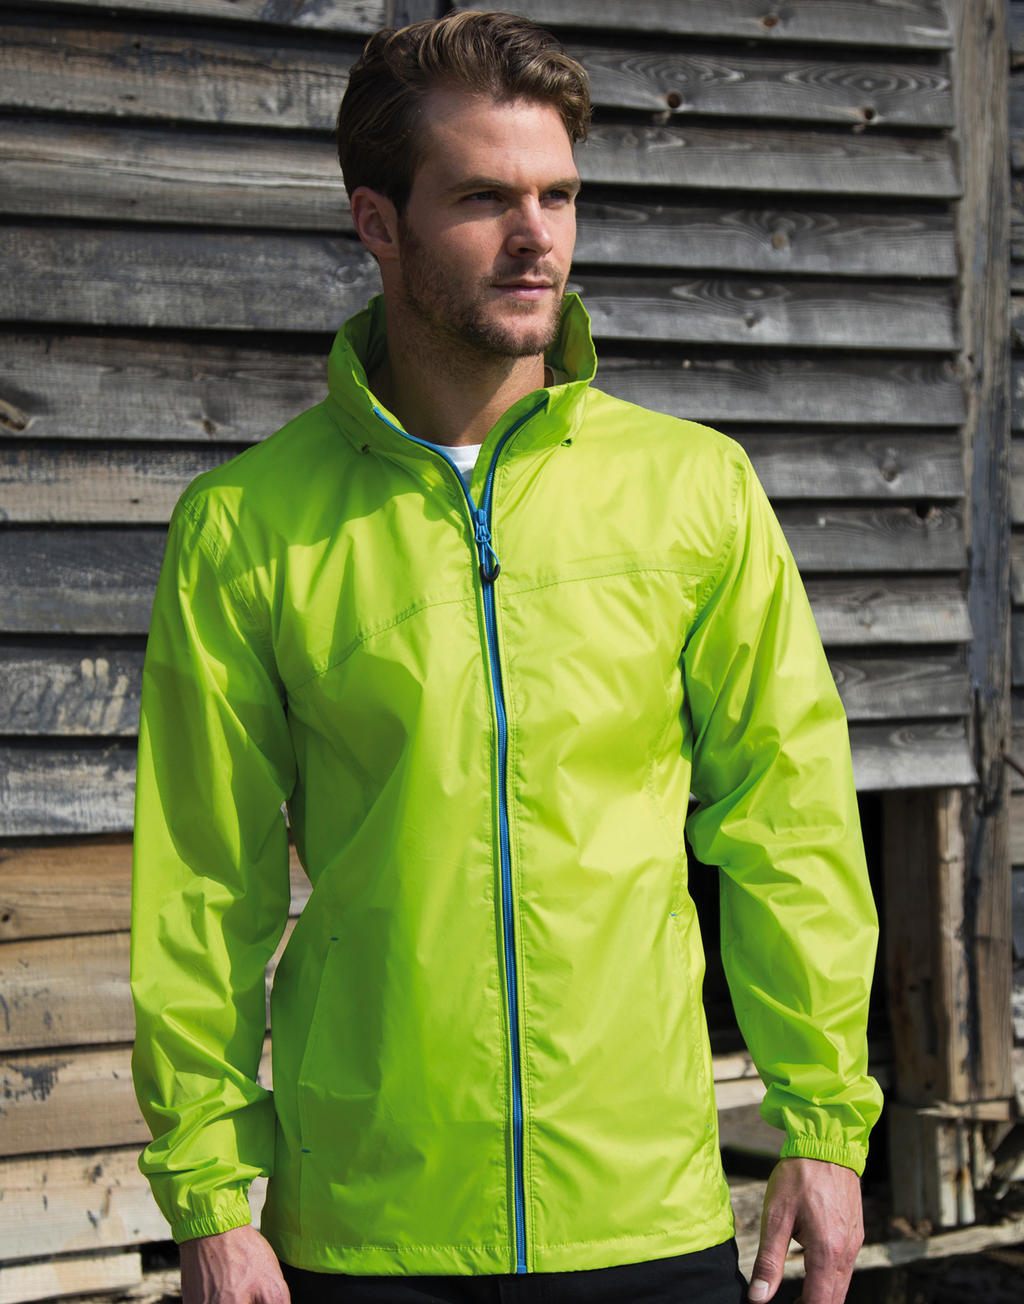  HDI Quest Lightweight Stowable Jacket in Farbe Black/Orange